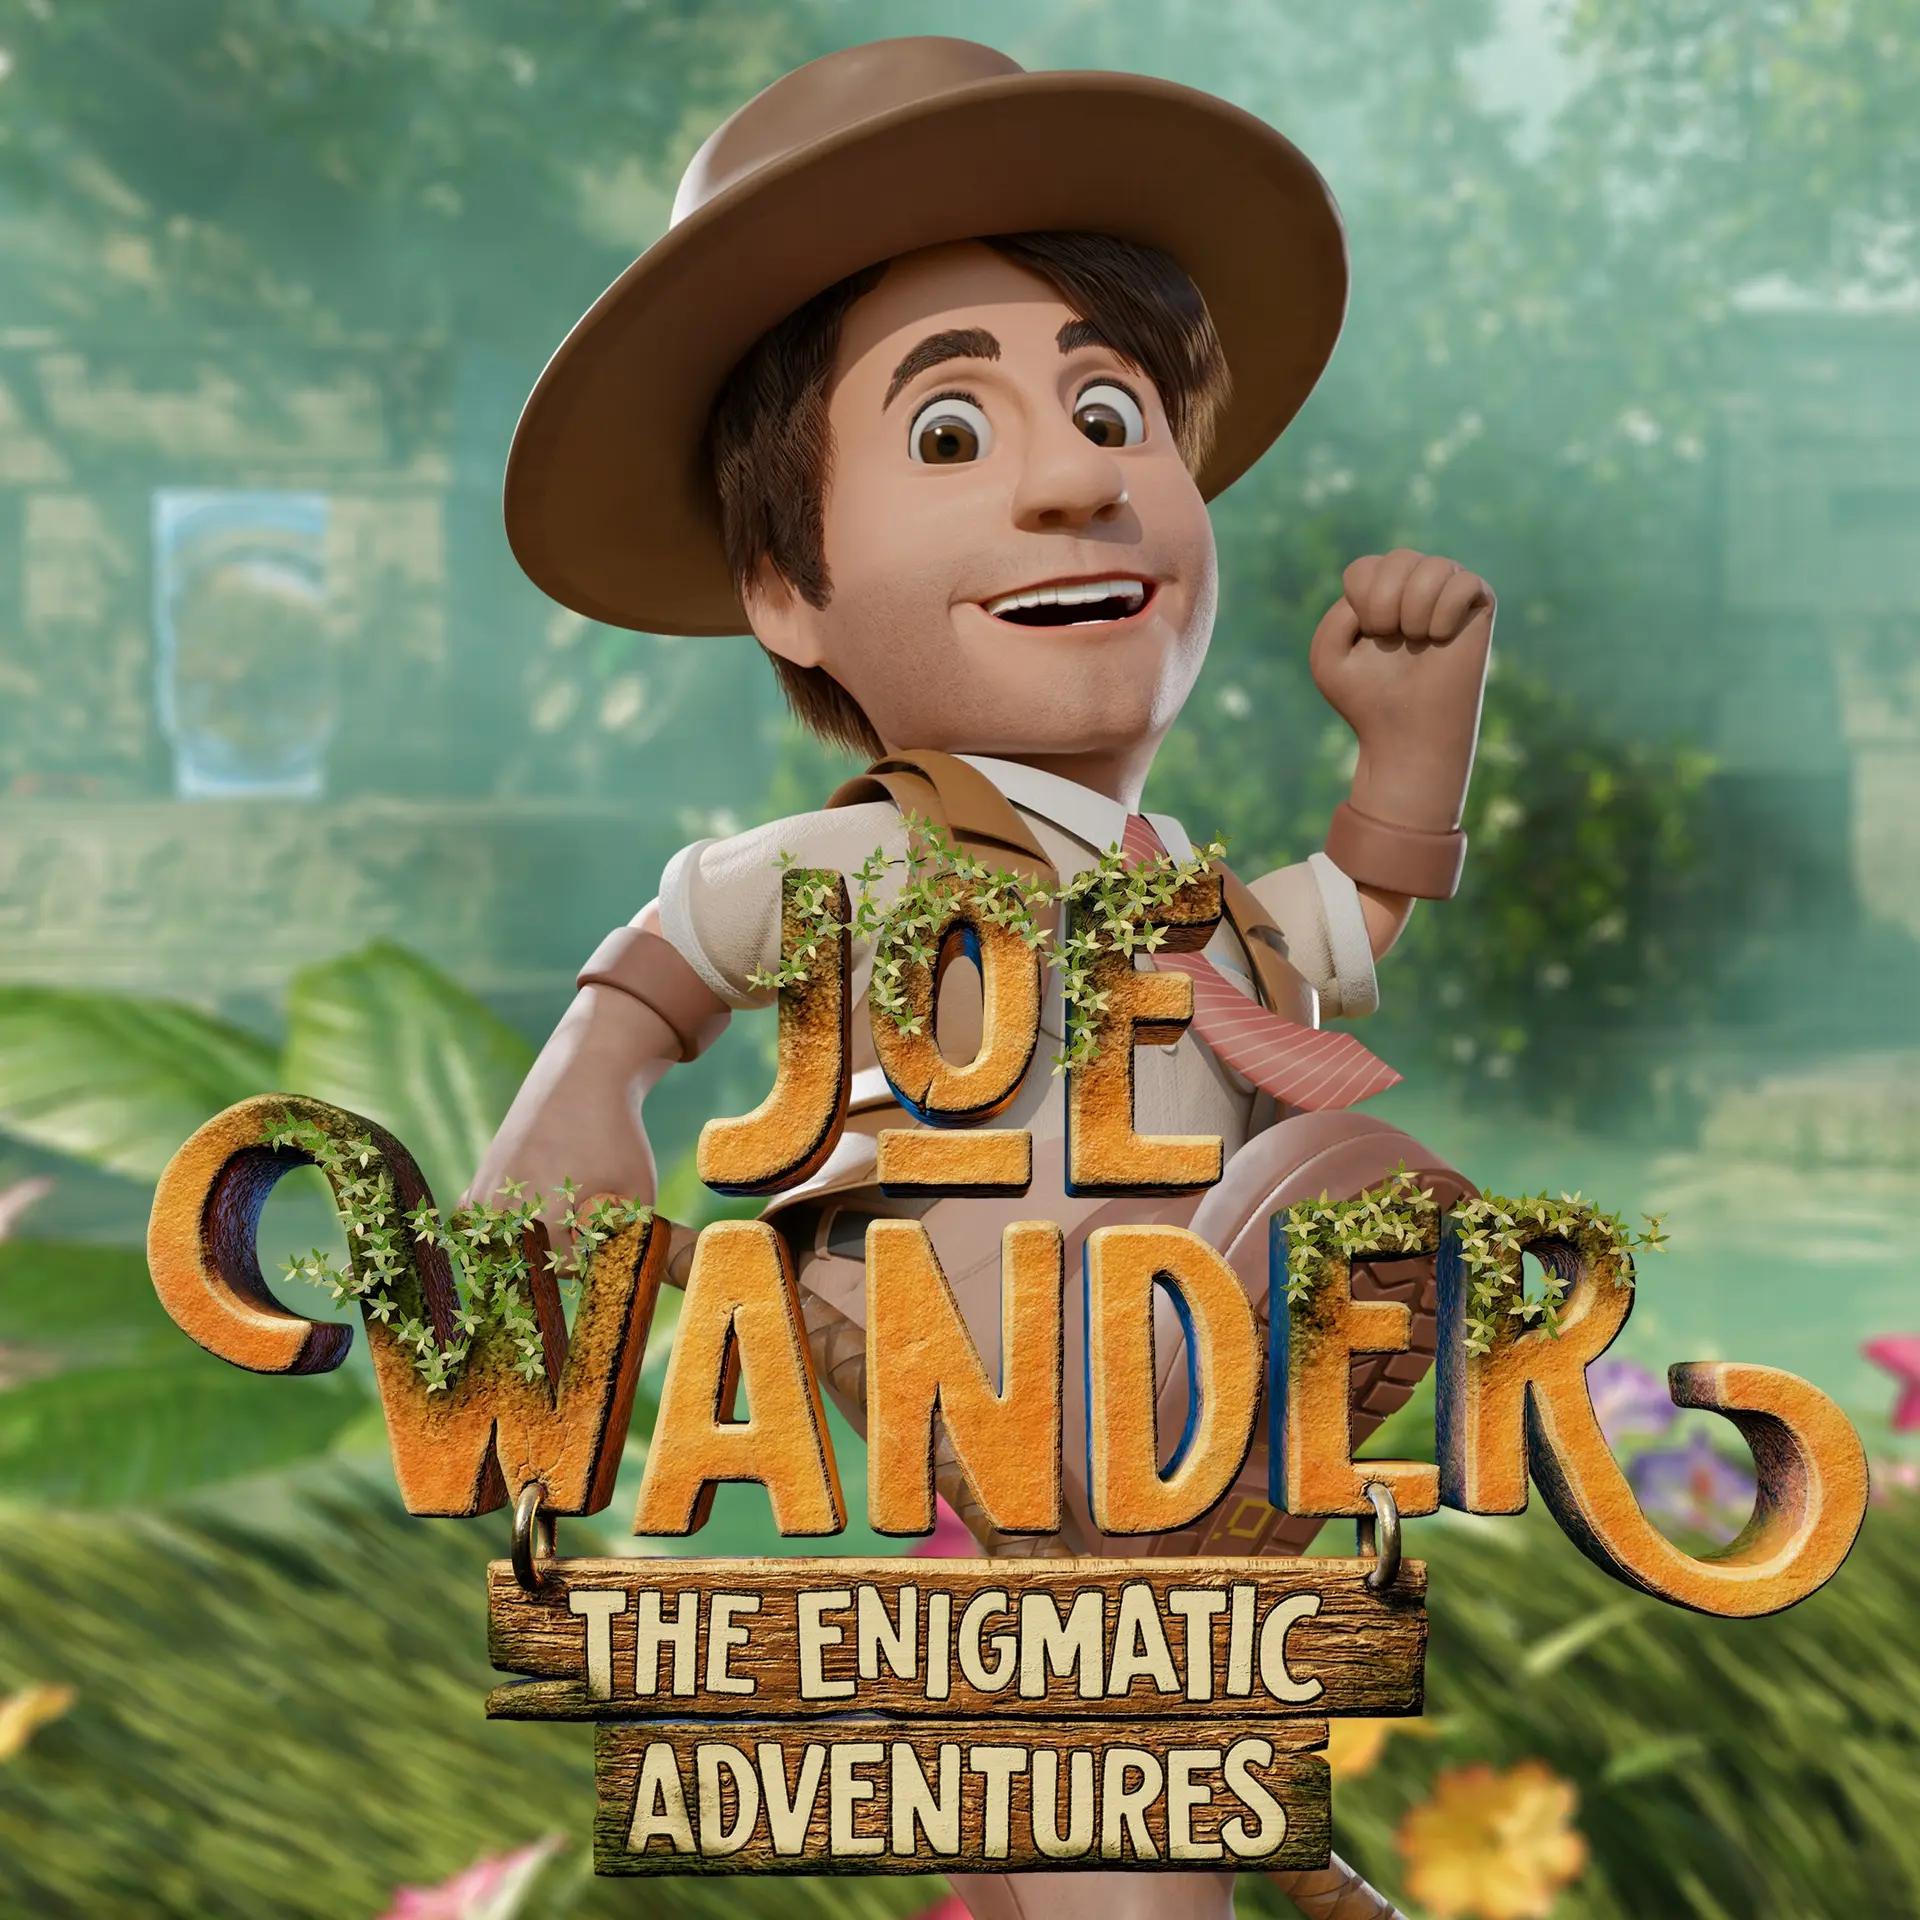 Joe Wander and the Enigmatic adventures (XBOX One - Cheapest Store)